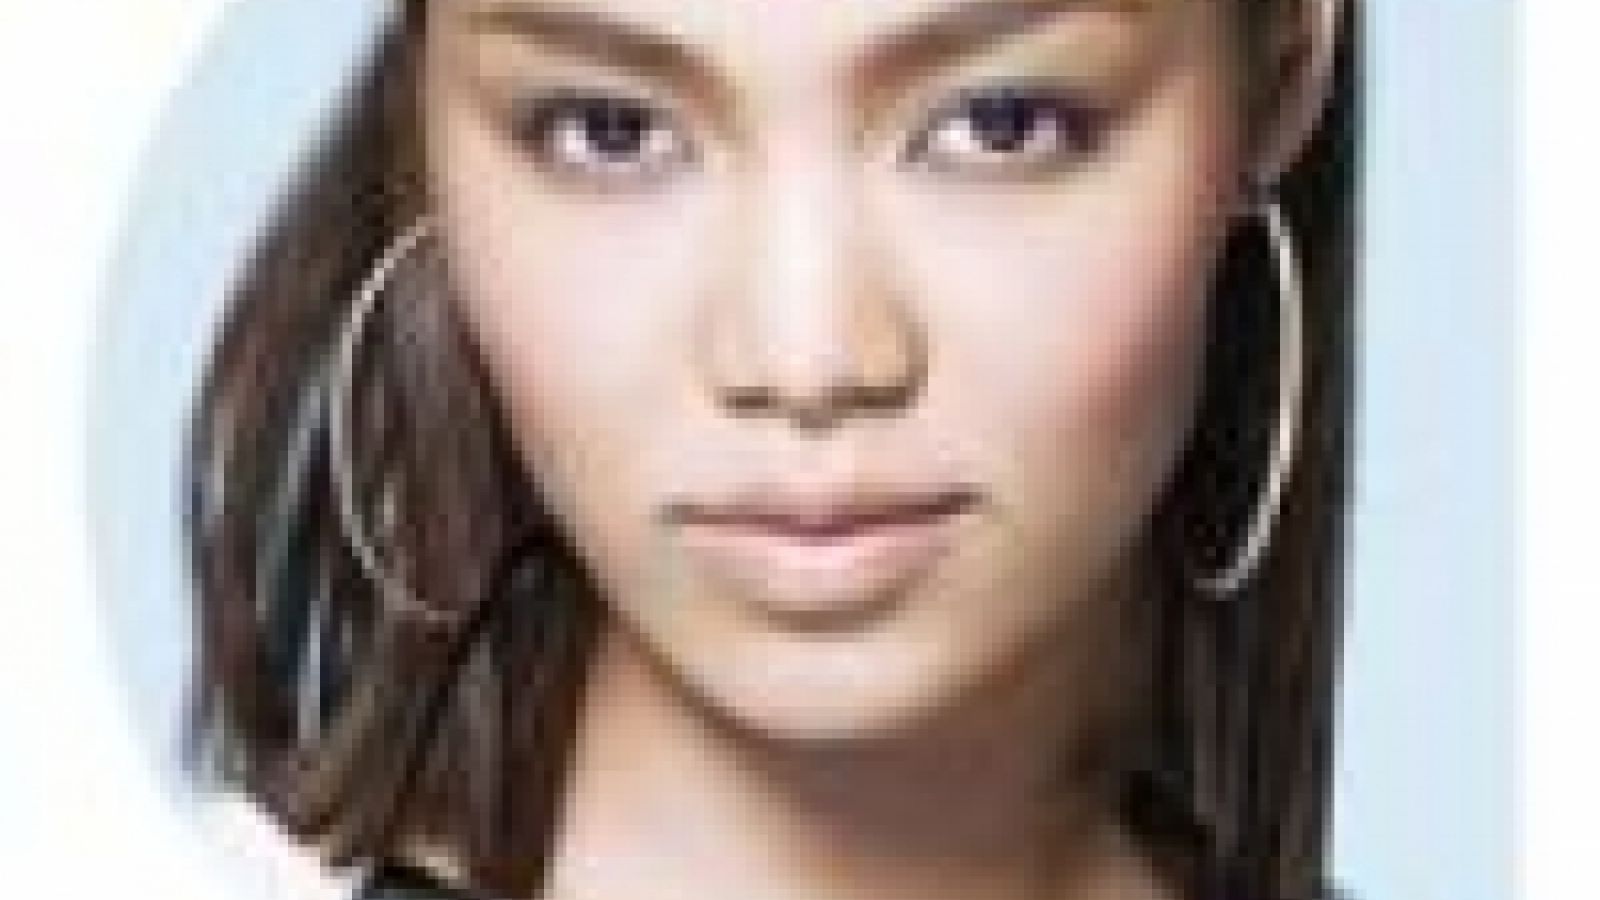 Crystal Kay - Color Change! © 2013 K/ioon Music Inc. Provided by E-TALENTBANK.